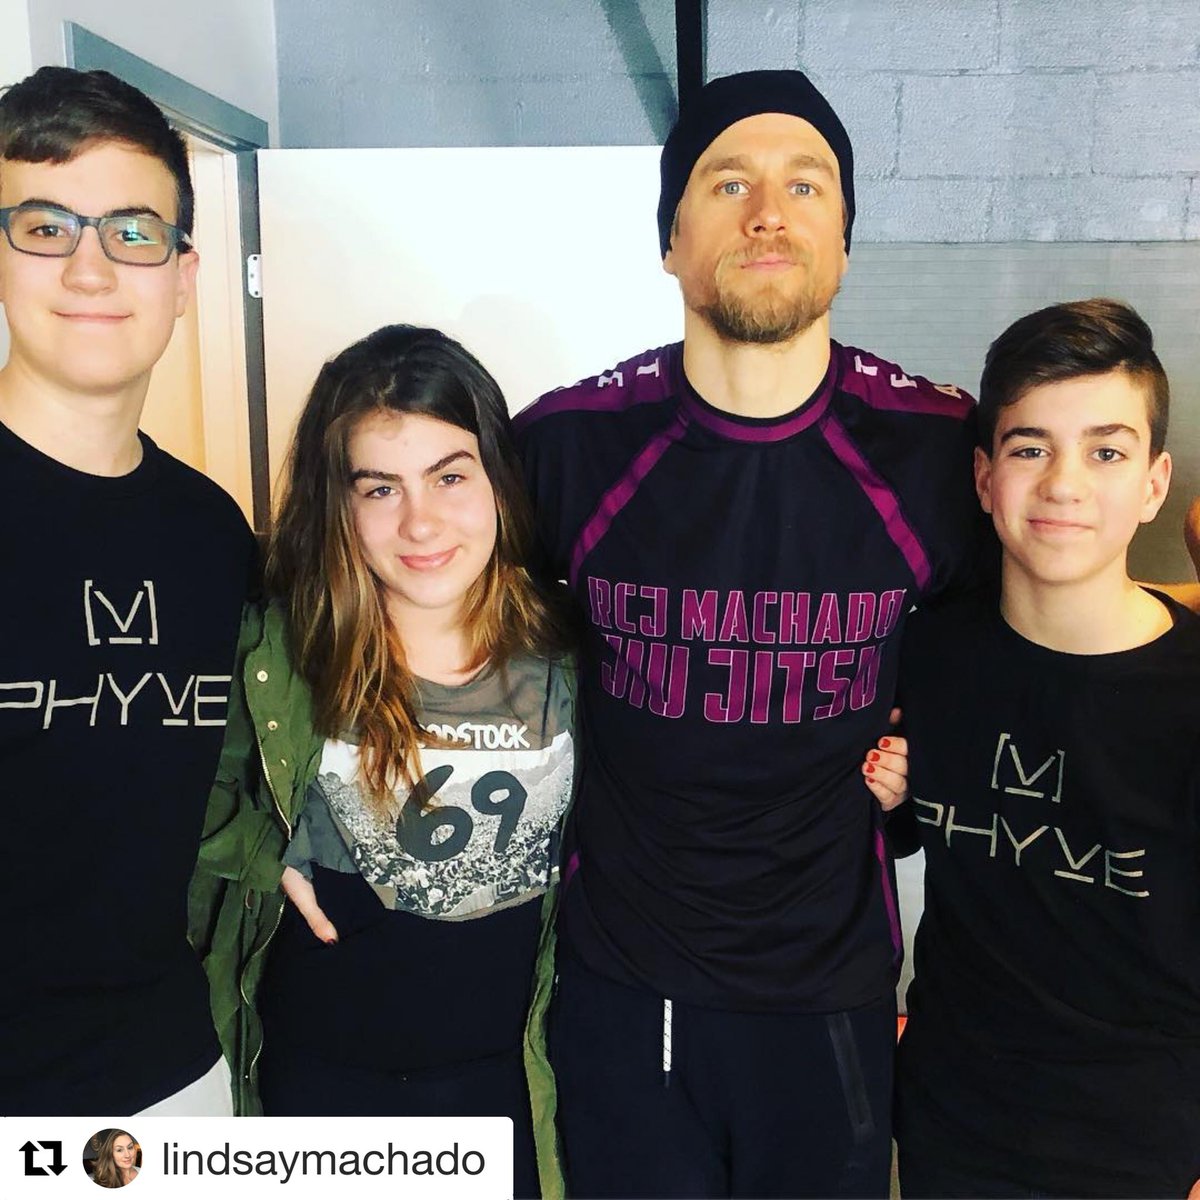 #Repost @lindsaymachado with @get_repost
・・・
Kids had a super blast getting to meet and pick Charlie Hunnams brain on the acting business! Can’t wait to meet up with him and uncle @riganmachado next week to talk more shop! #pricelessexperiences #blessed #actors #charliehunnam